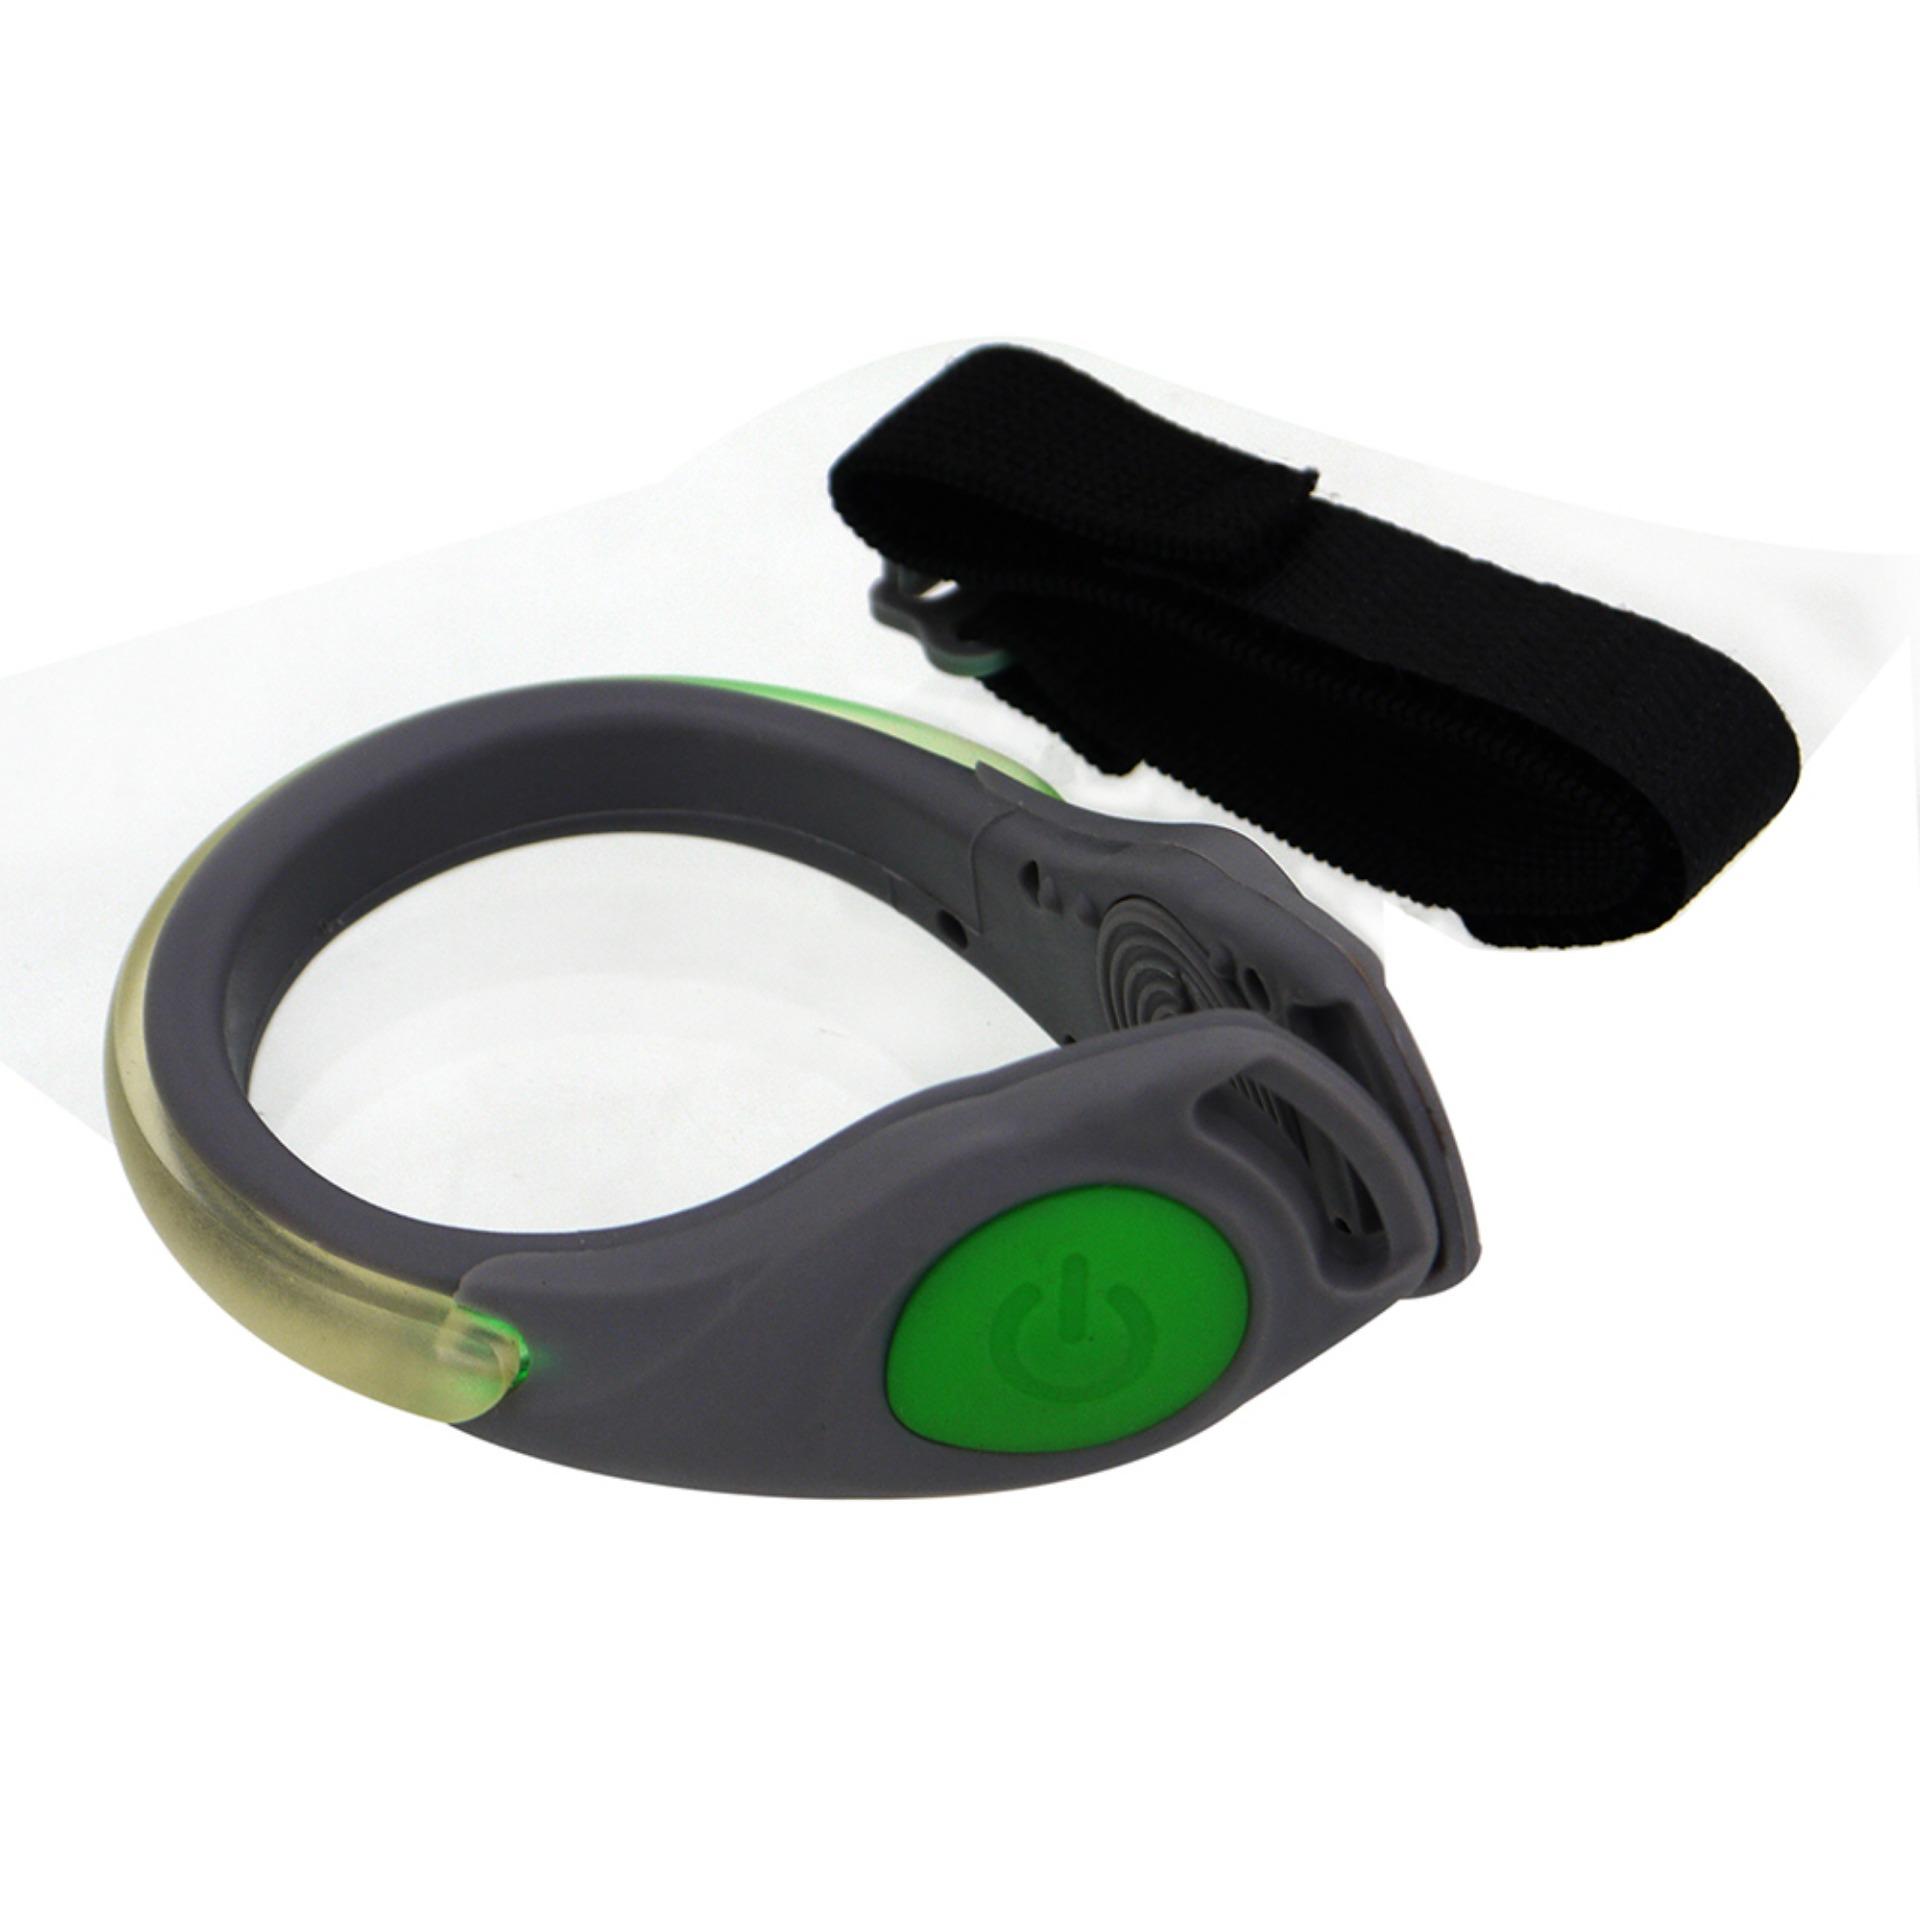 reflective accessories for walkers